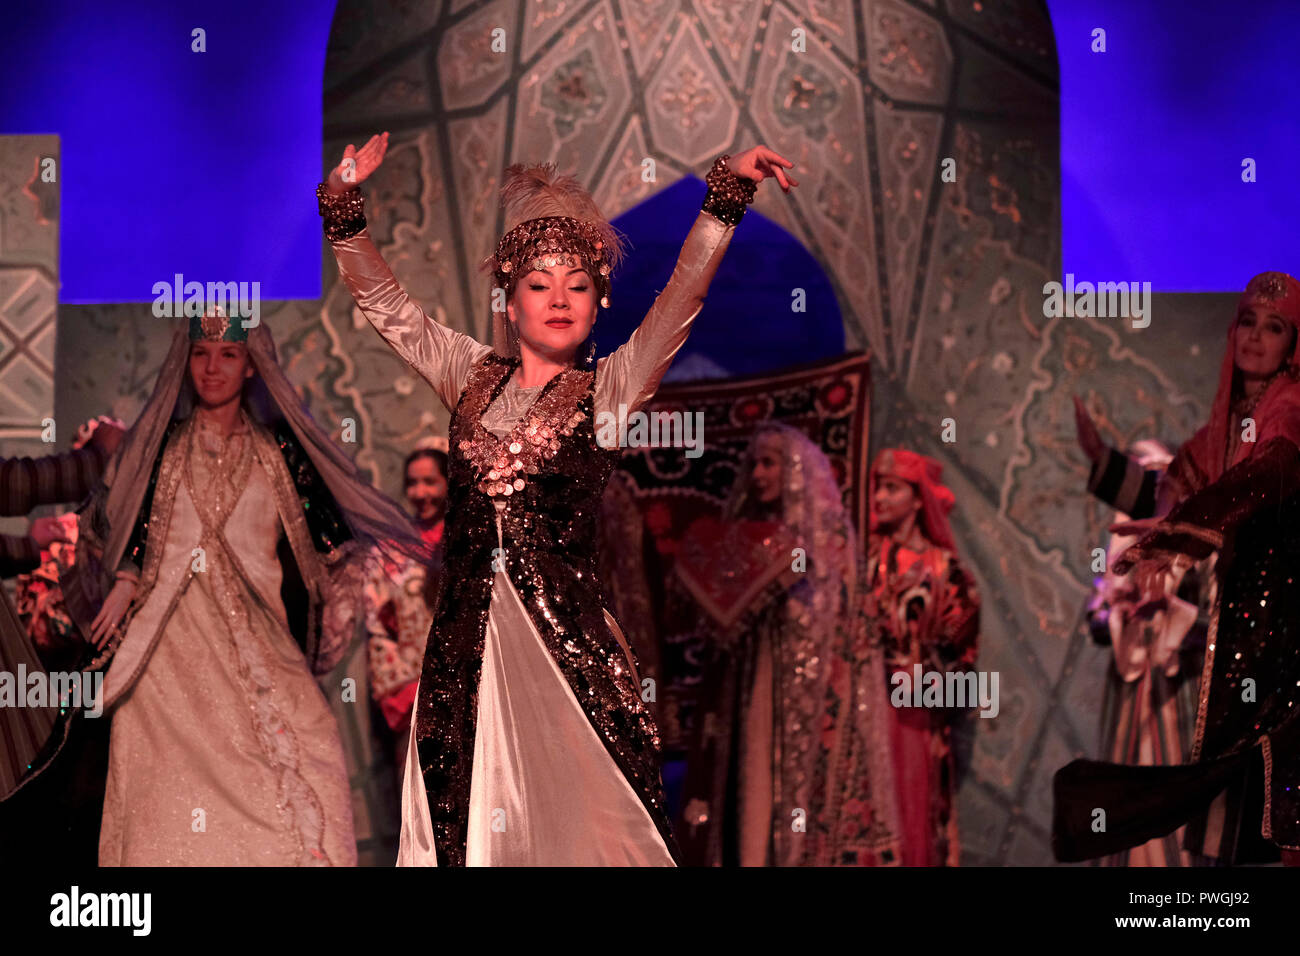 Dancers wearing historical costume during an ethno-cultural performance staged by “El Merosi” ('The People's Heritage') the theater of historical costumes working since 2005 in the city of Samarkand alternatively Samarqand of the Timurid dynasty in Uzbekistan Stock Photo